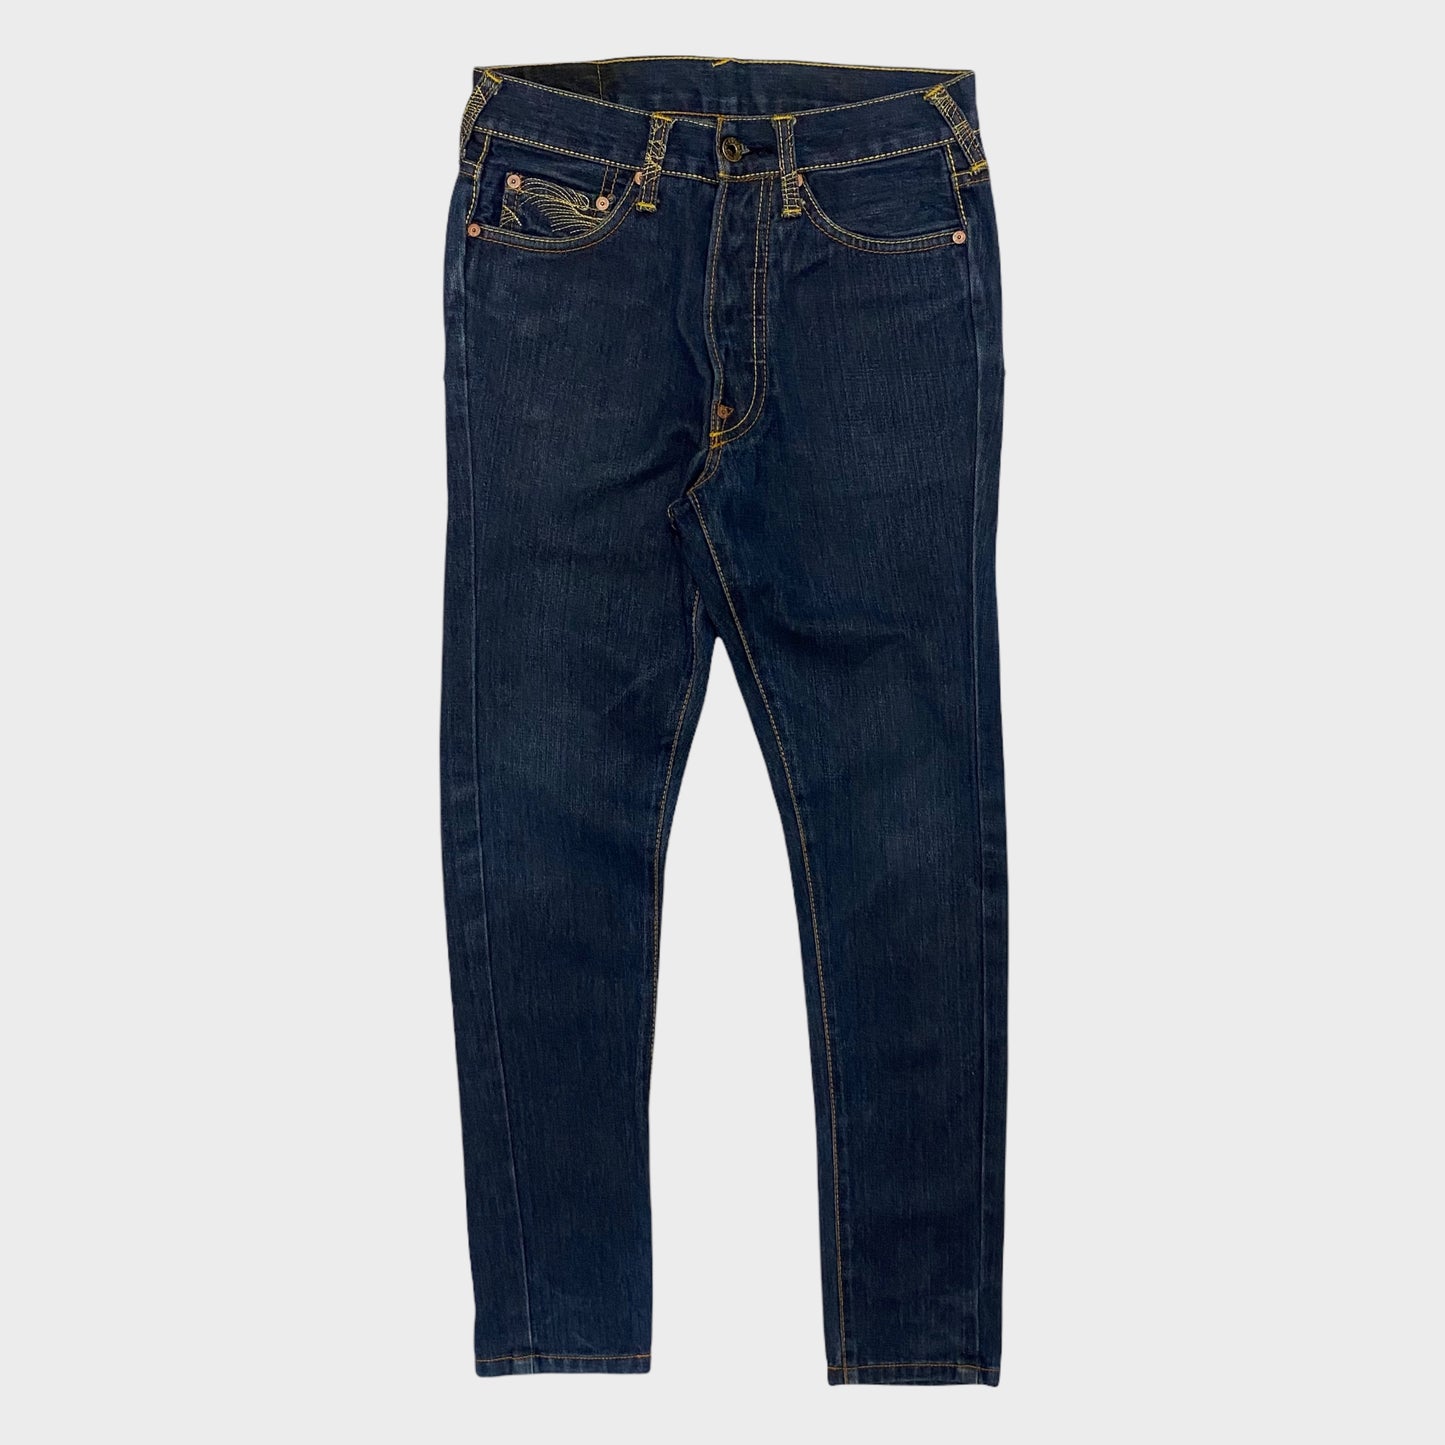 RMC 00’s Embroidered Denim Jeans - w28